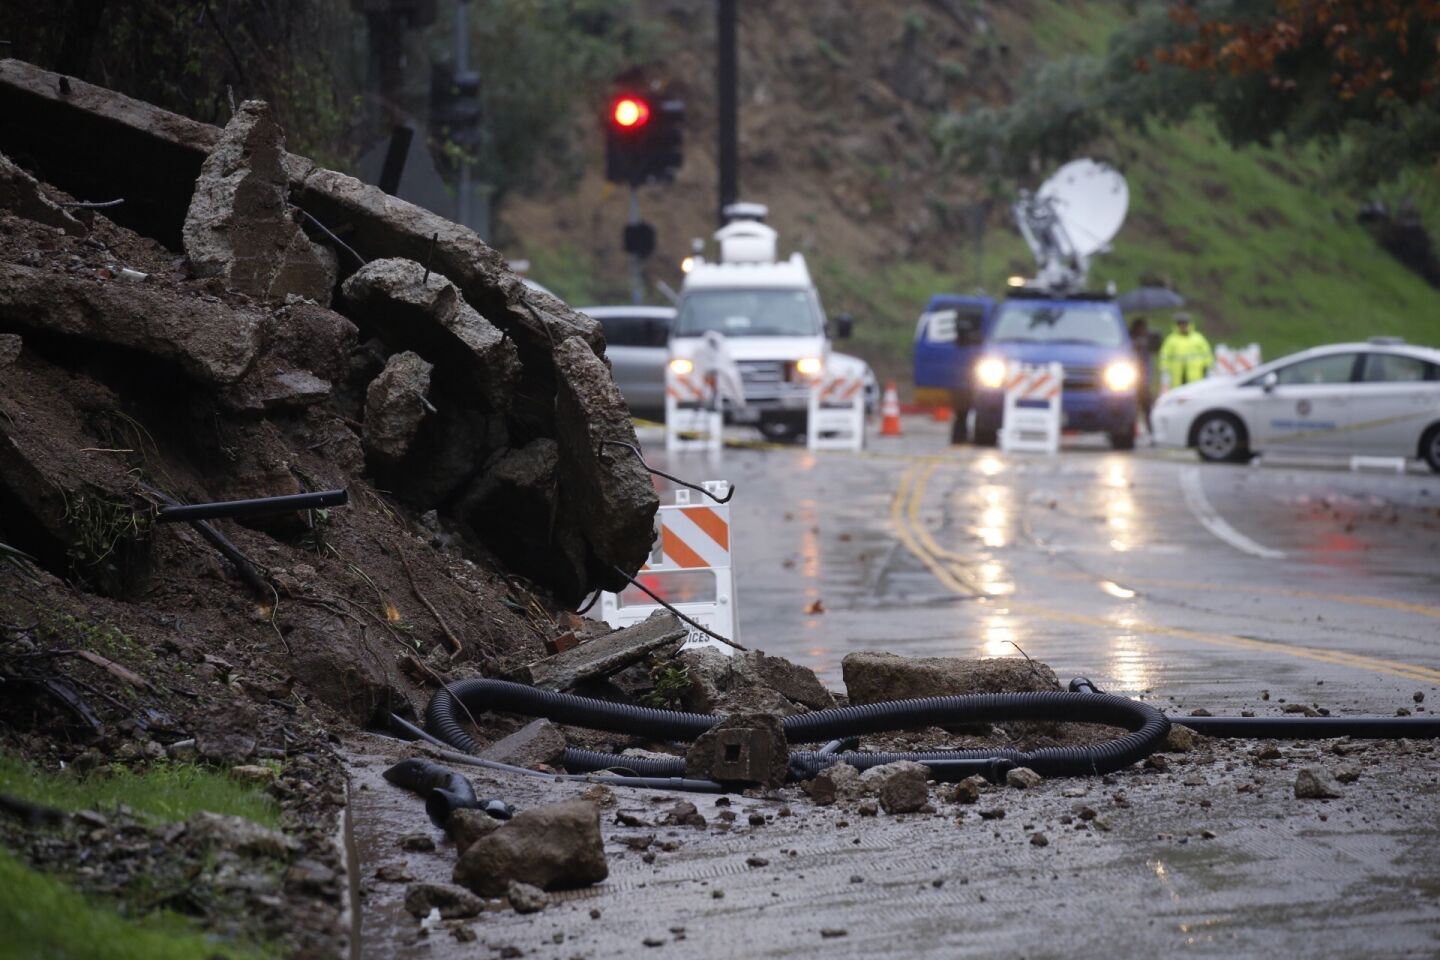 News crews gather on Laurel Canyon Blvd, which remained closed in both directions Thursday morning in the Hollywood Hills when part of a home's concrete foundation tumbled down a hillside after a round of rainfall.